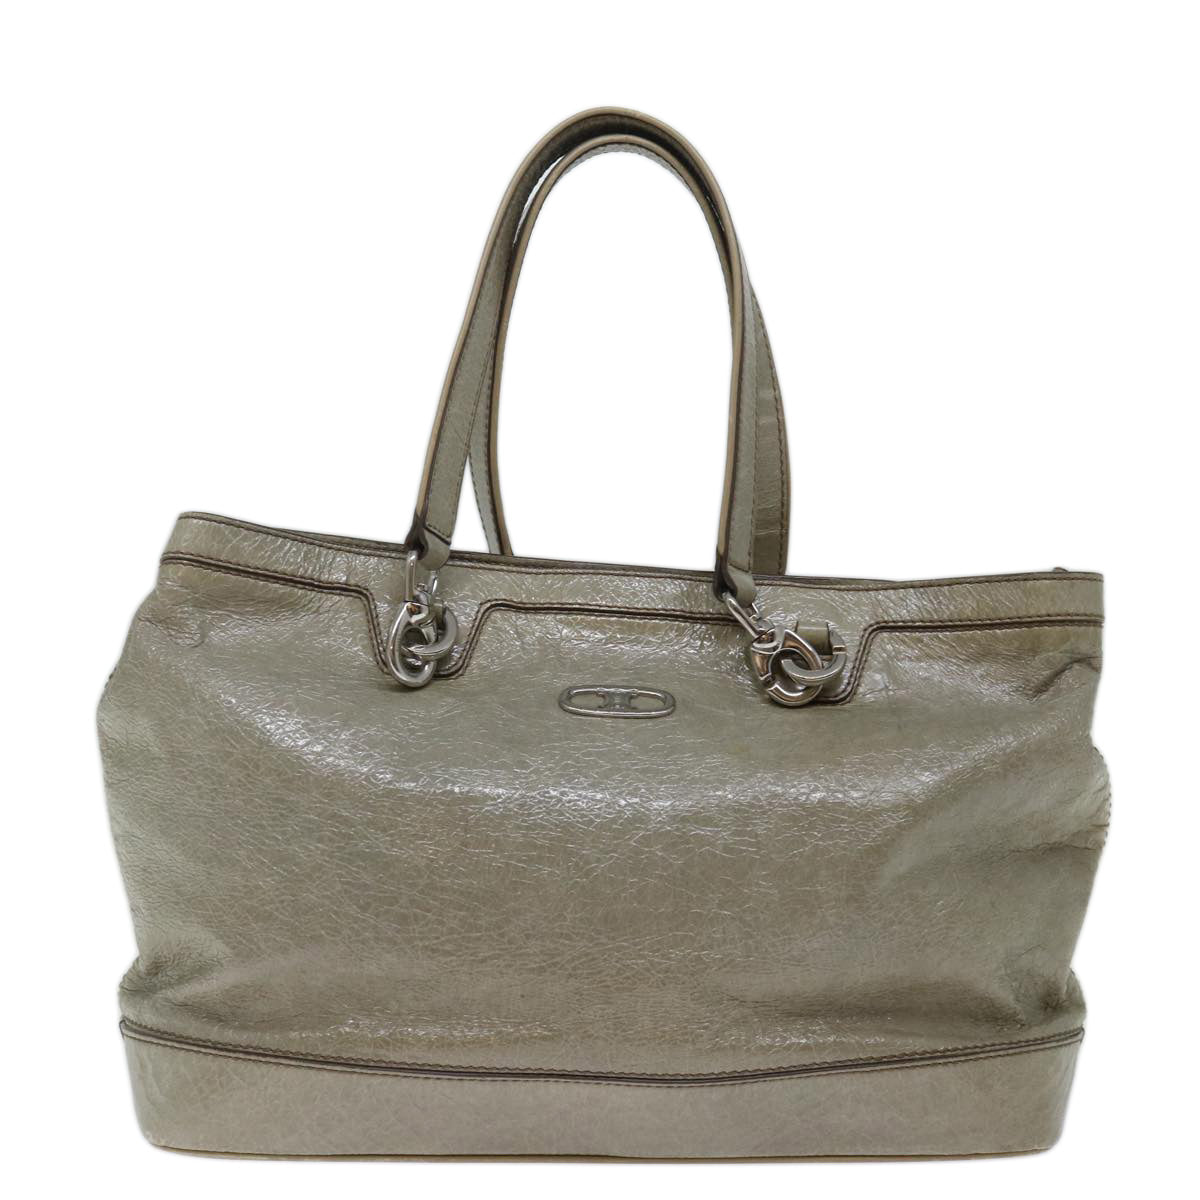 CELINE Tote Bag Patent leather Gray Auth ar11732